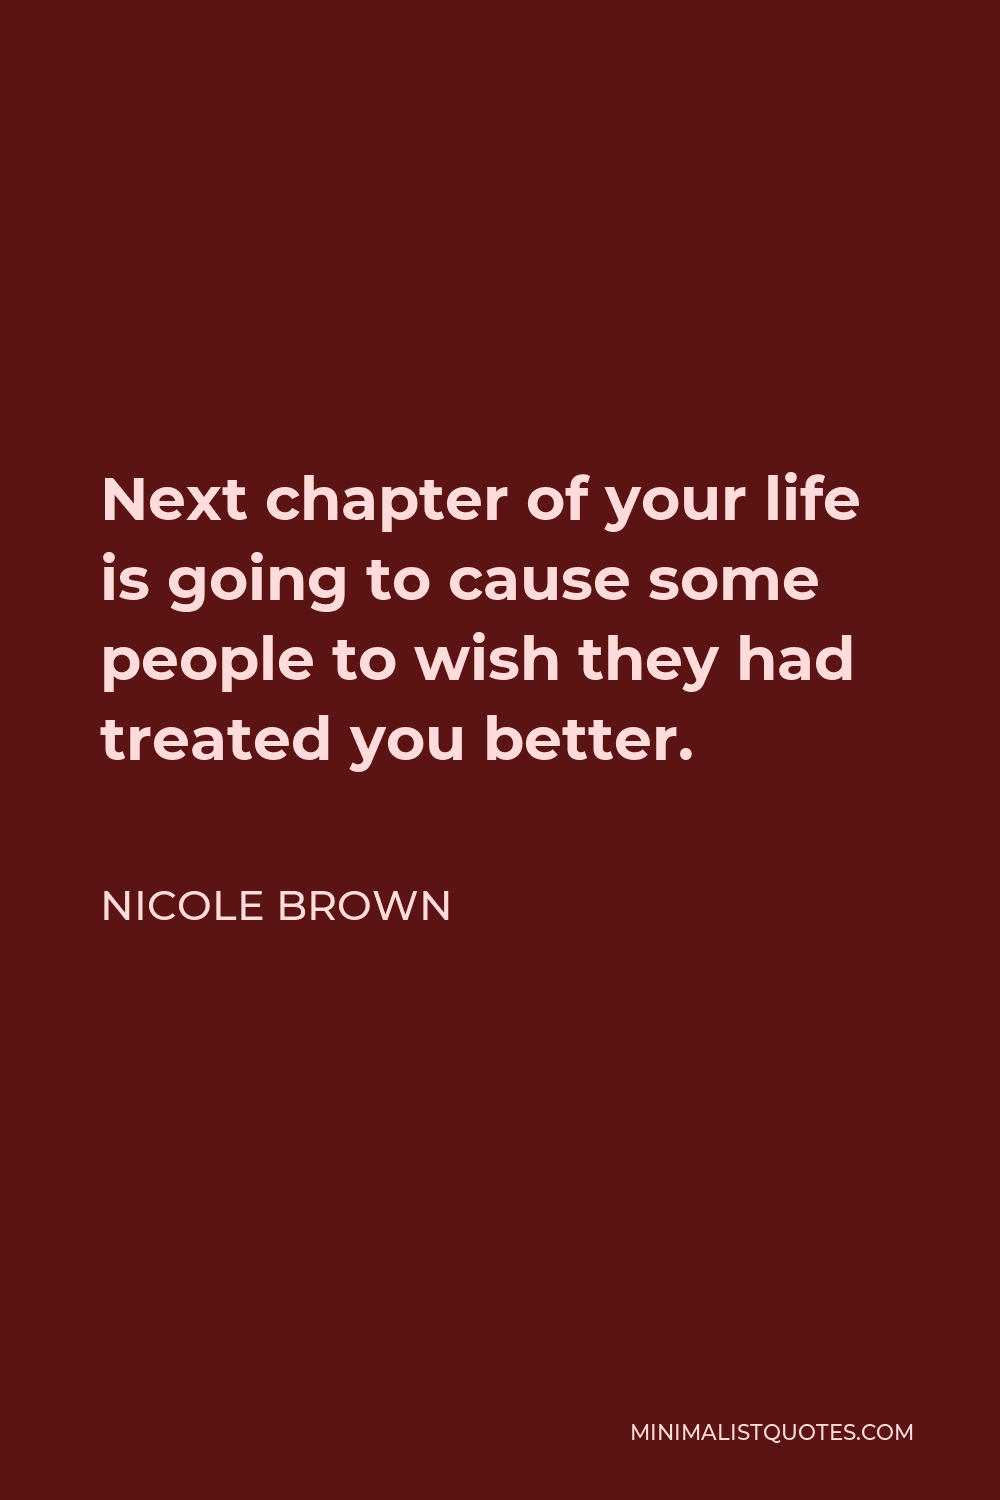 Nicole Brown Quote - Next chapter of your life is going to cause some people to wish they had treated you better.